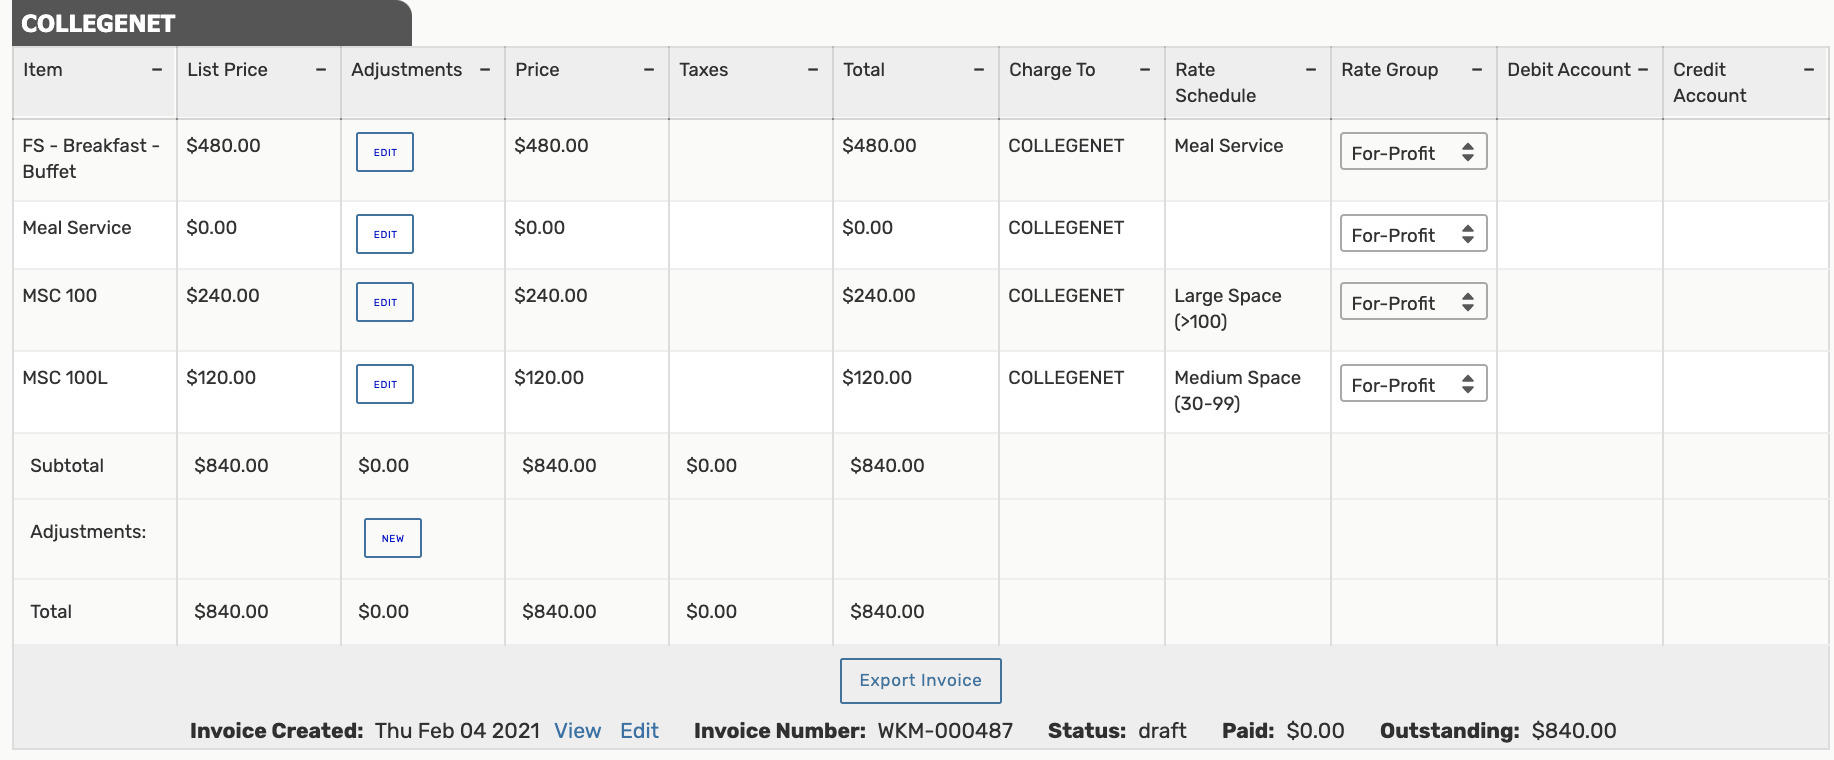 Screenshot of pricing details for an event with invoice information at the bottom